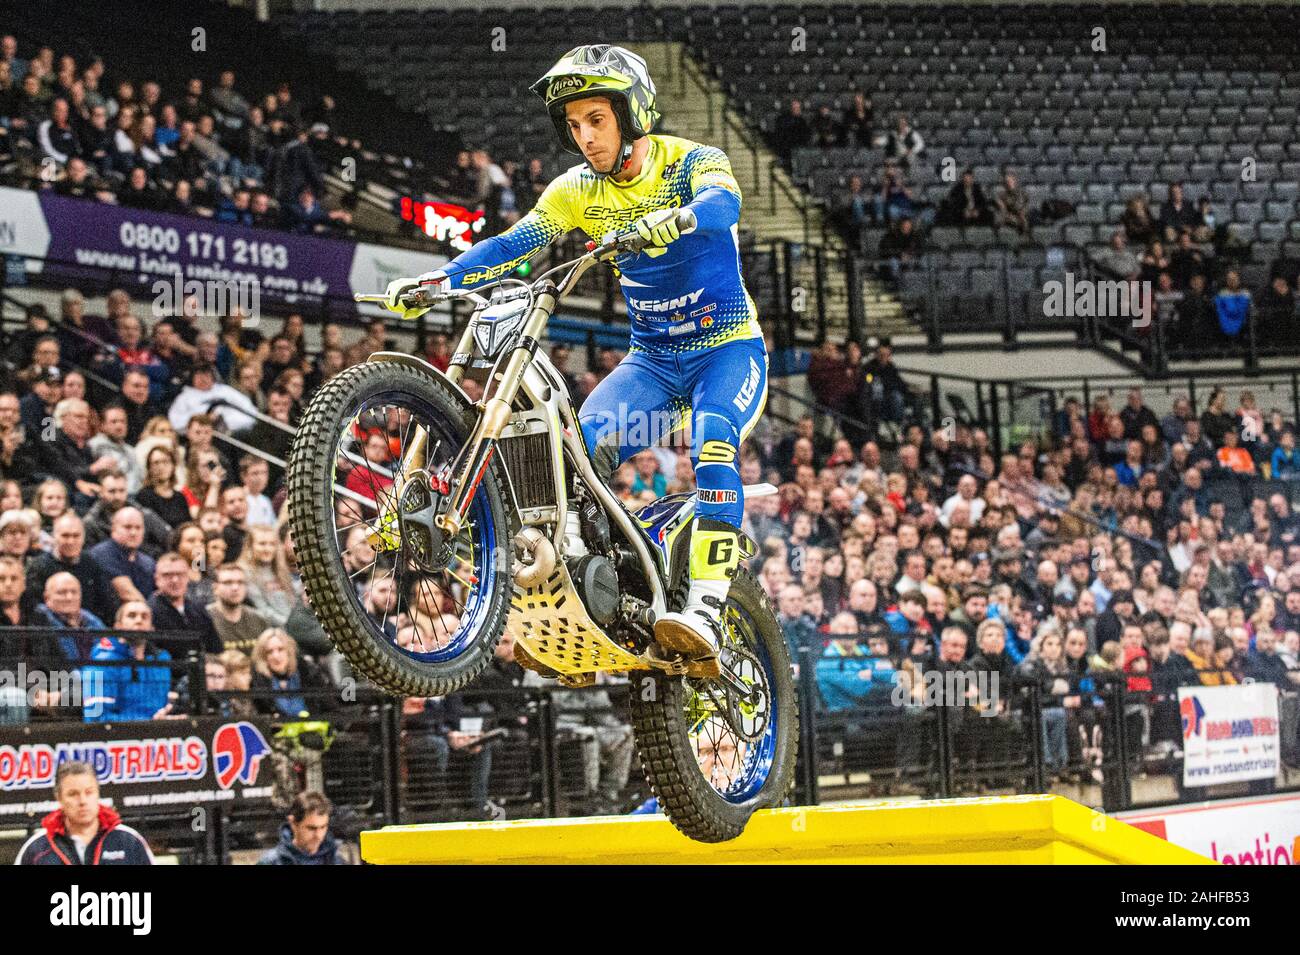 Sheffield, UK. 28th Dec, 2019. Sheffield, UK. Jeroni Fajardo, Spain (Sherco) on Section 6 during the 25th Anniversary Sheffield Indoor Trial at the FlyDSA Arena, Sheffield on Saturday 28th December 2019. (Credit: Ian Charles | MI News) Credit: MI News & Sport /Alamy Live News Stock Photo